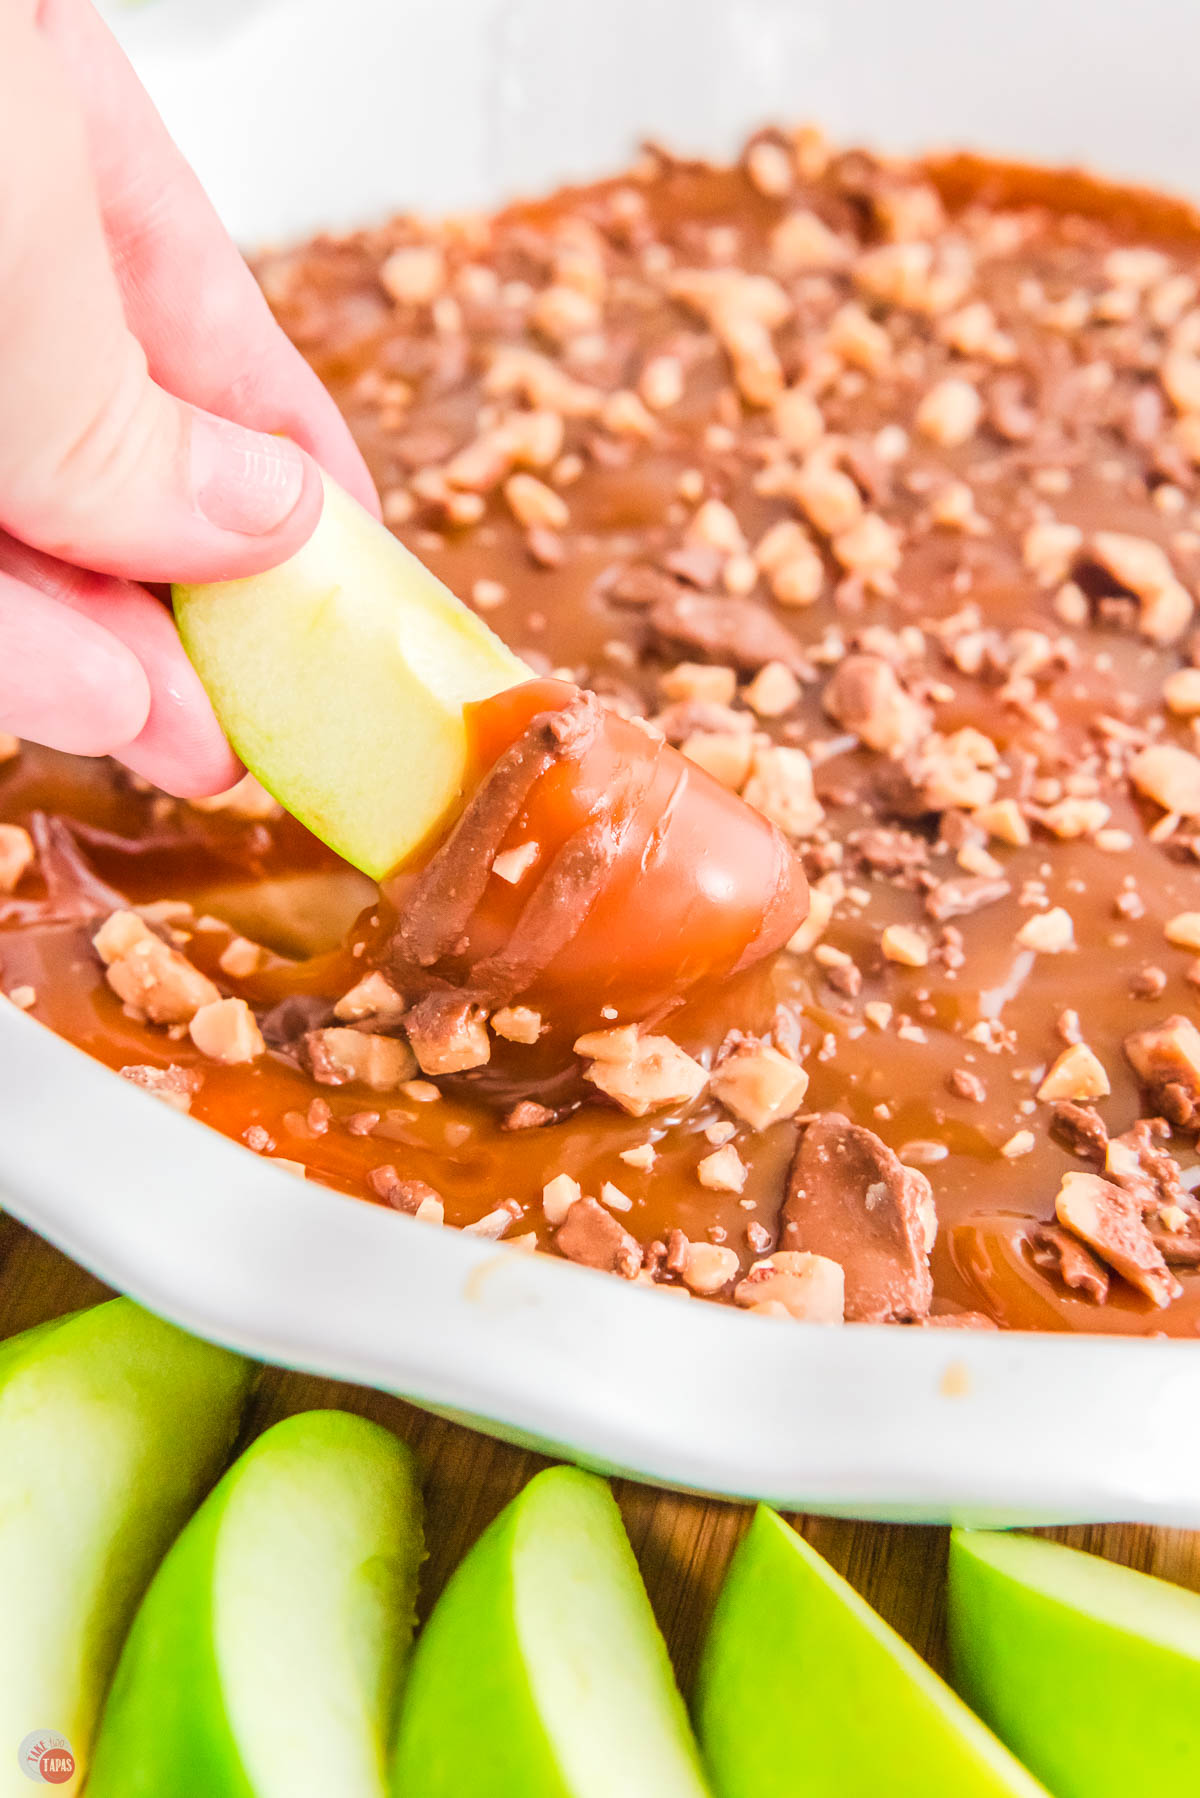 homemade caramel apple dip with a hand and apple slice.